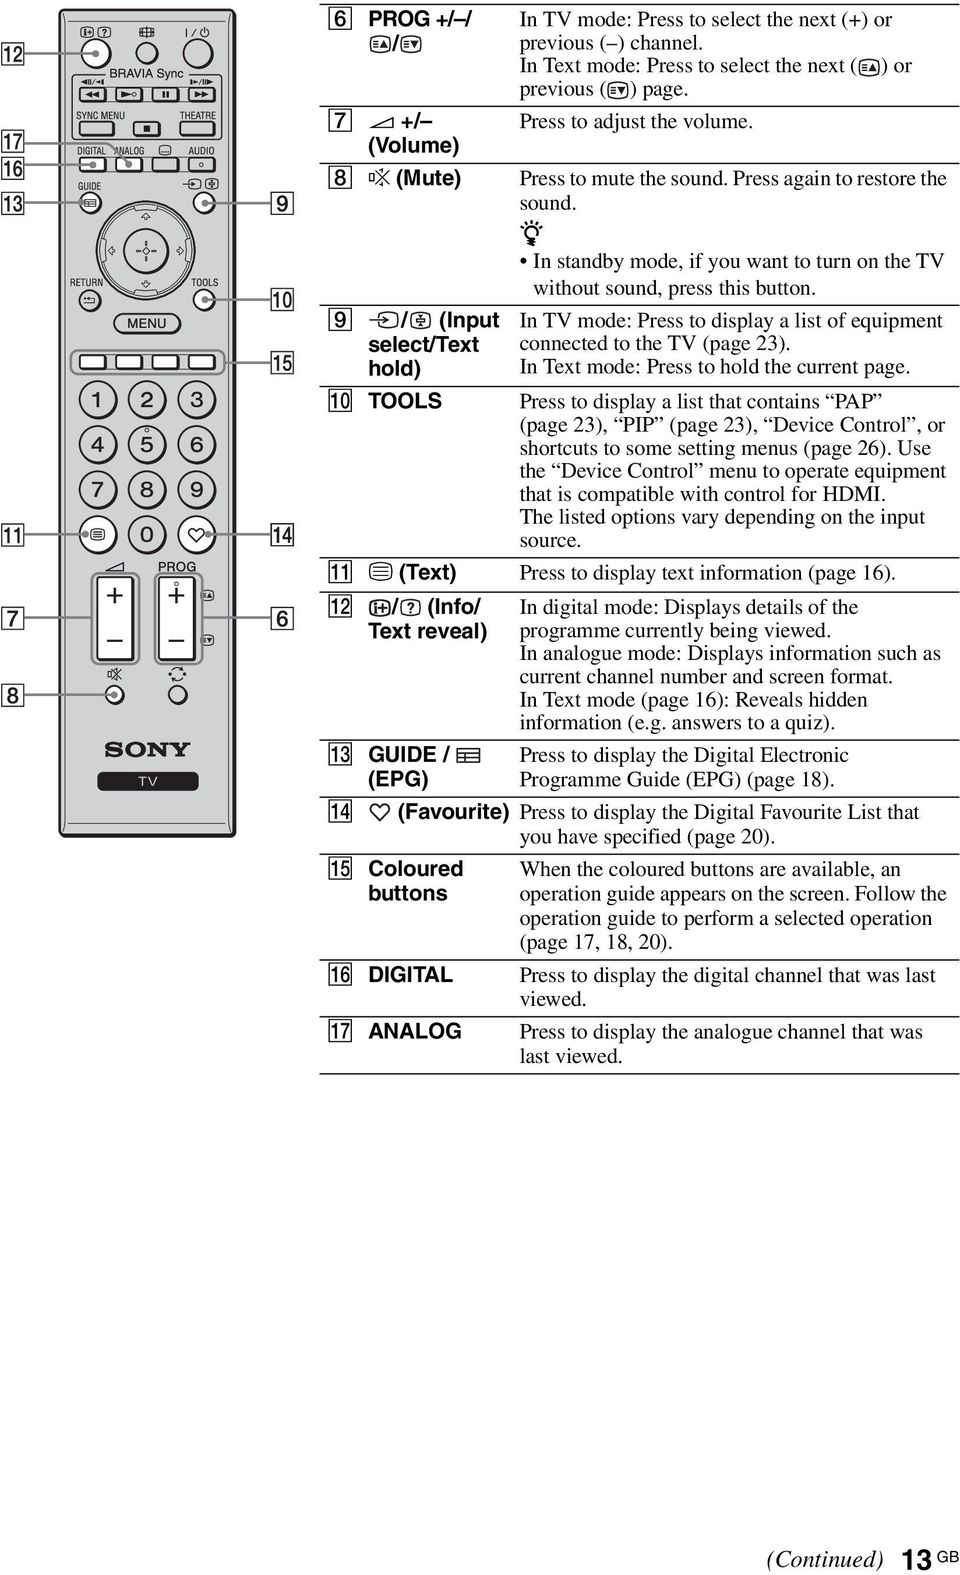 9 / (Input select/text hold) In TV mode: Press to display a list of equipment connected to the TV (page 23). In Text mode: Press to hold the current page.